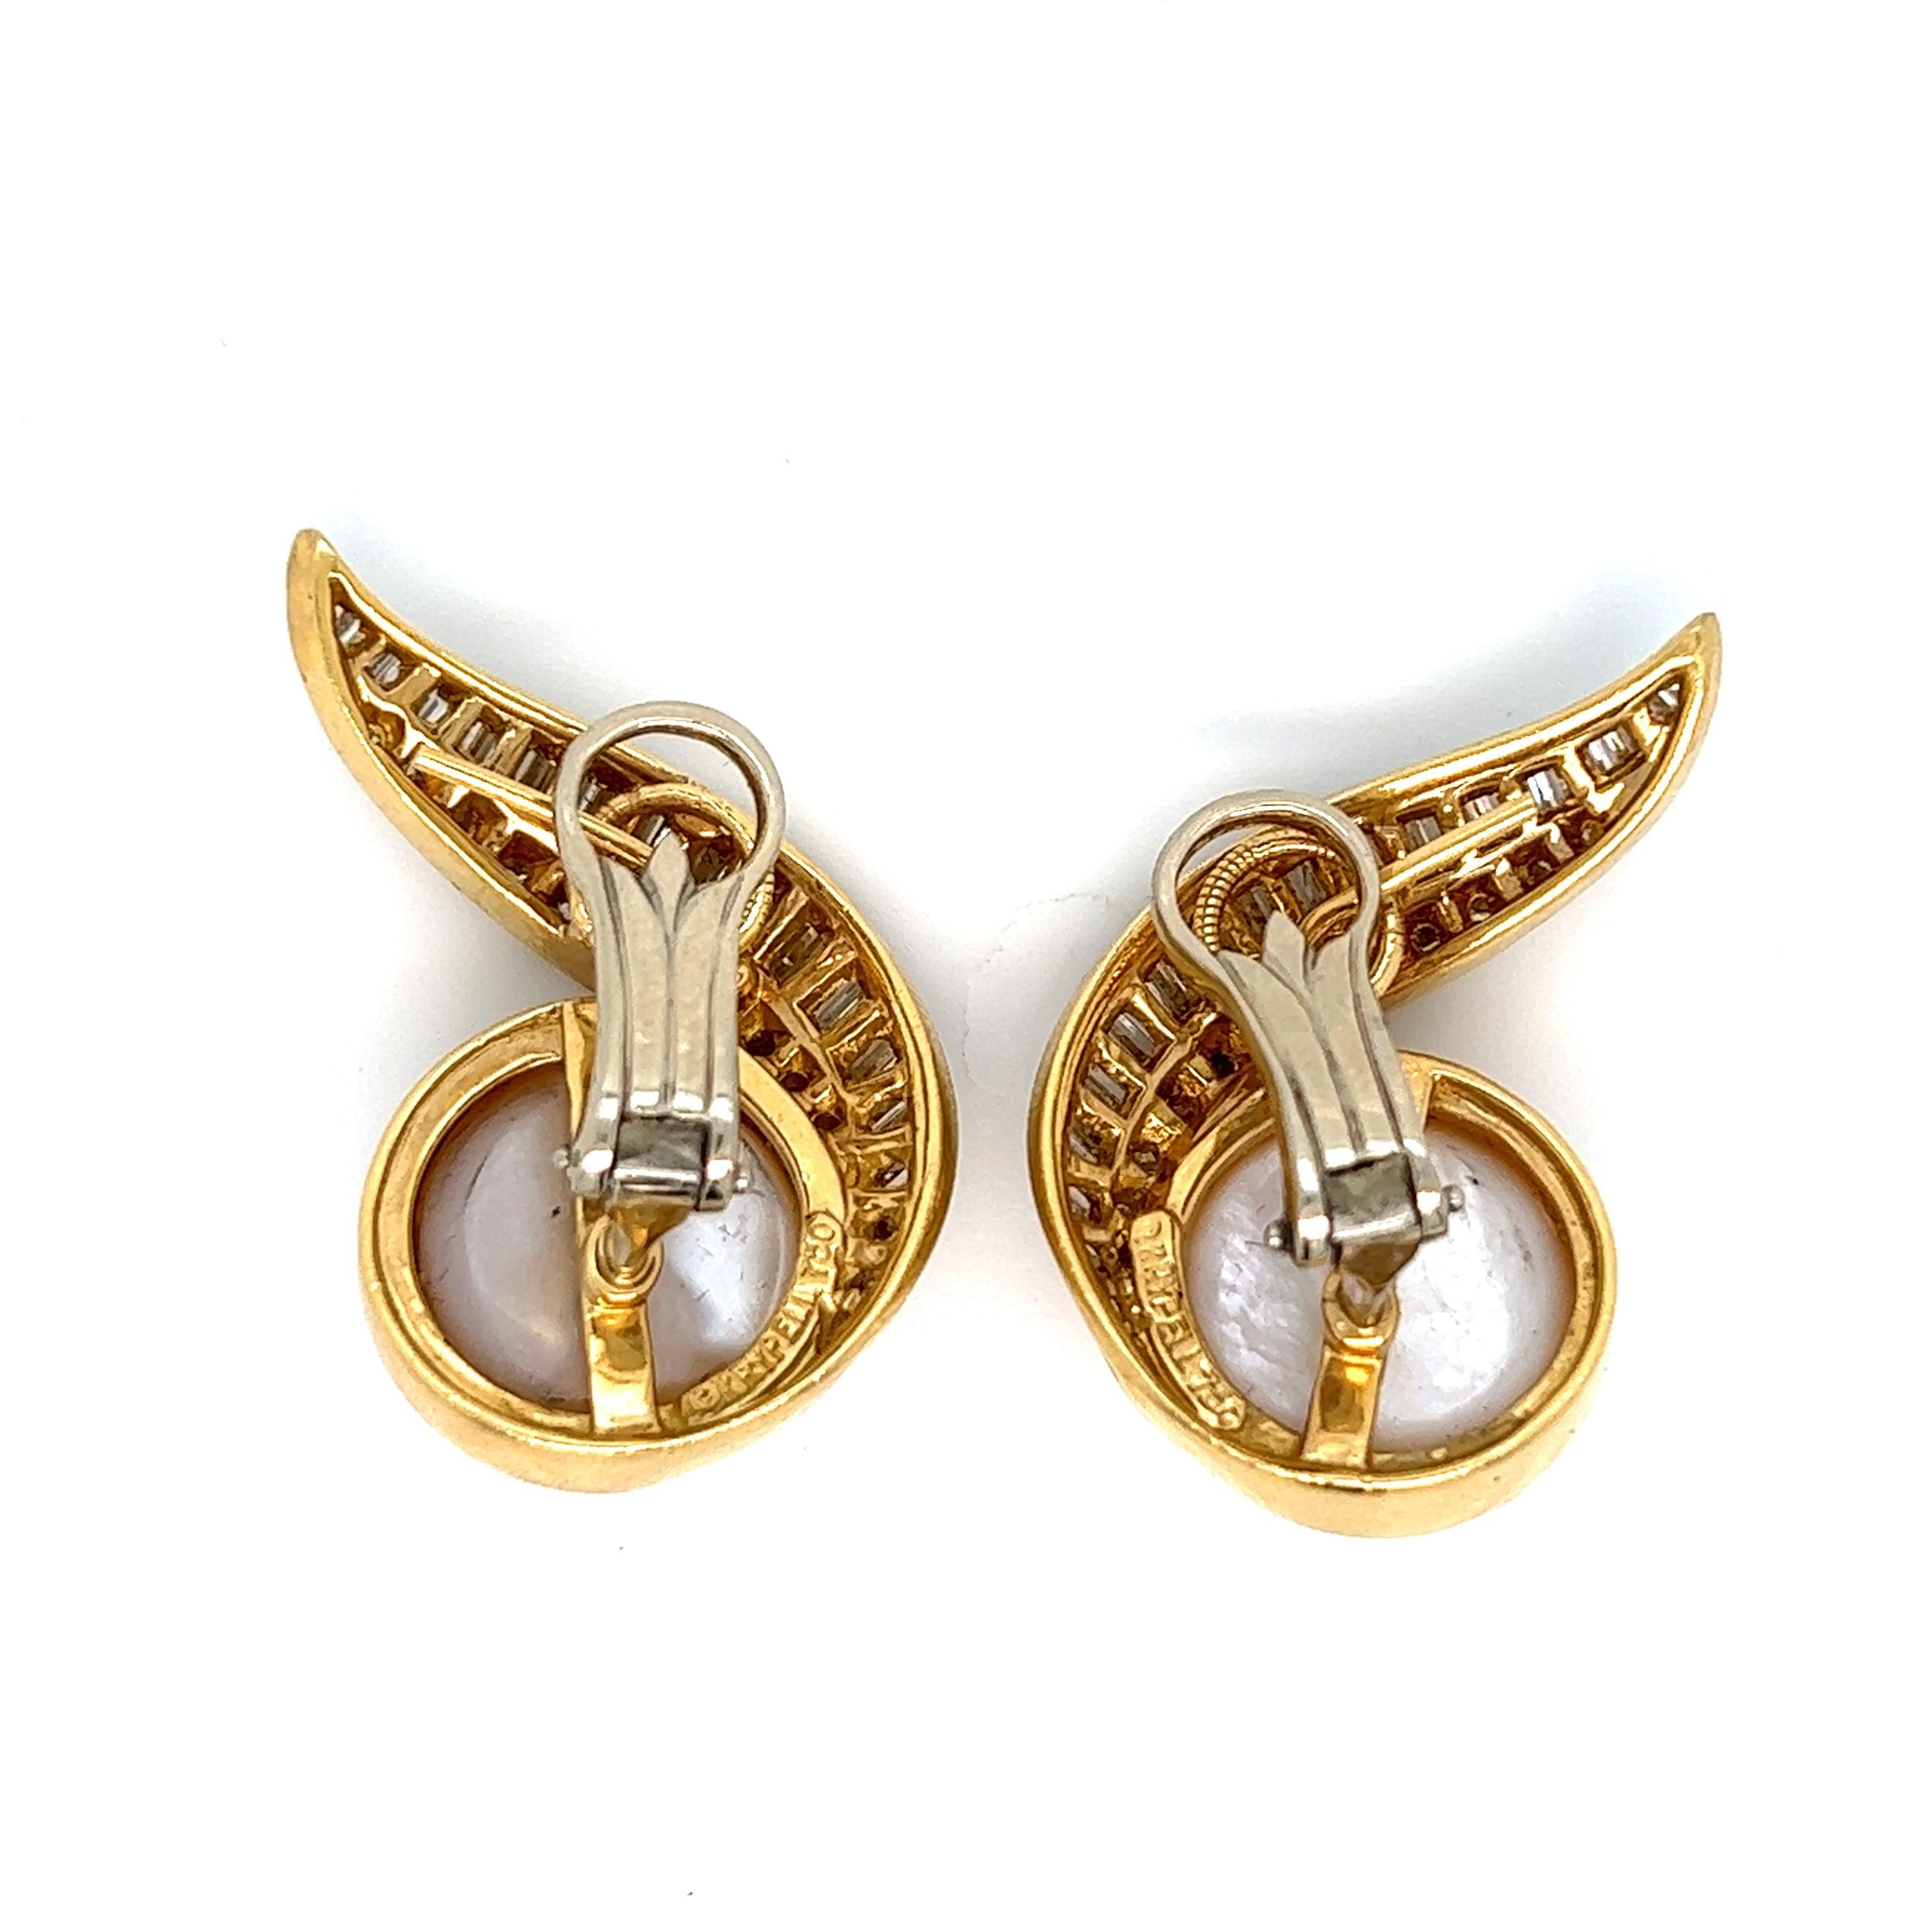 Charles Krypell 18 karat yellow gold ear clips, marked Krypell / 750

Mabé pearls 14 mm, baguette and round-cut diamonds of approximately 4.50 carats

Dimensions: width 1 inch, length 1.13 inch
Total weight: 25.6 grams 